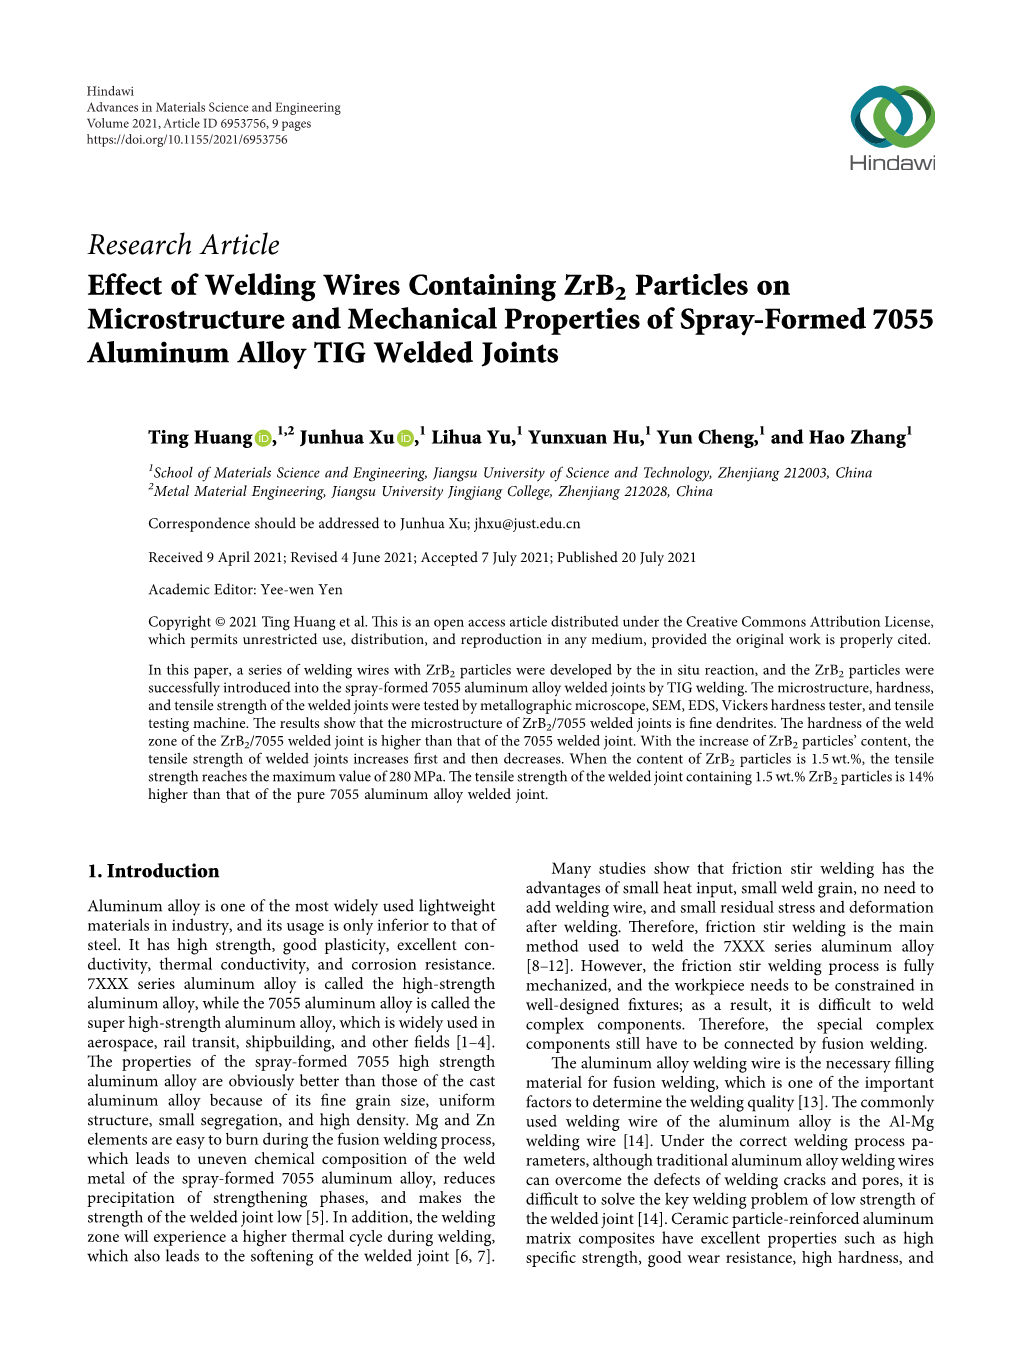 Effect of Welding Wires Containing Zrb2 Particles on Microstructure and Mechanical Properties of Spray-Formed 7055 Aluminum Alloy TIG Welded Joints